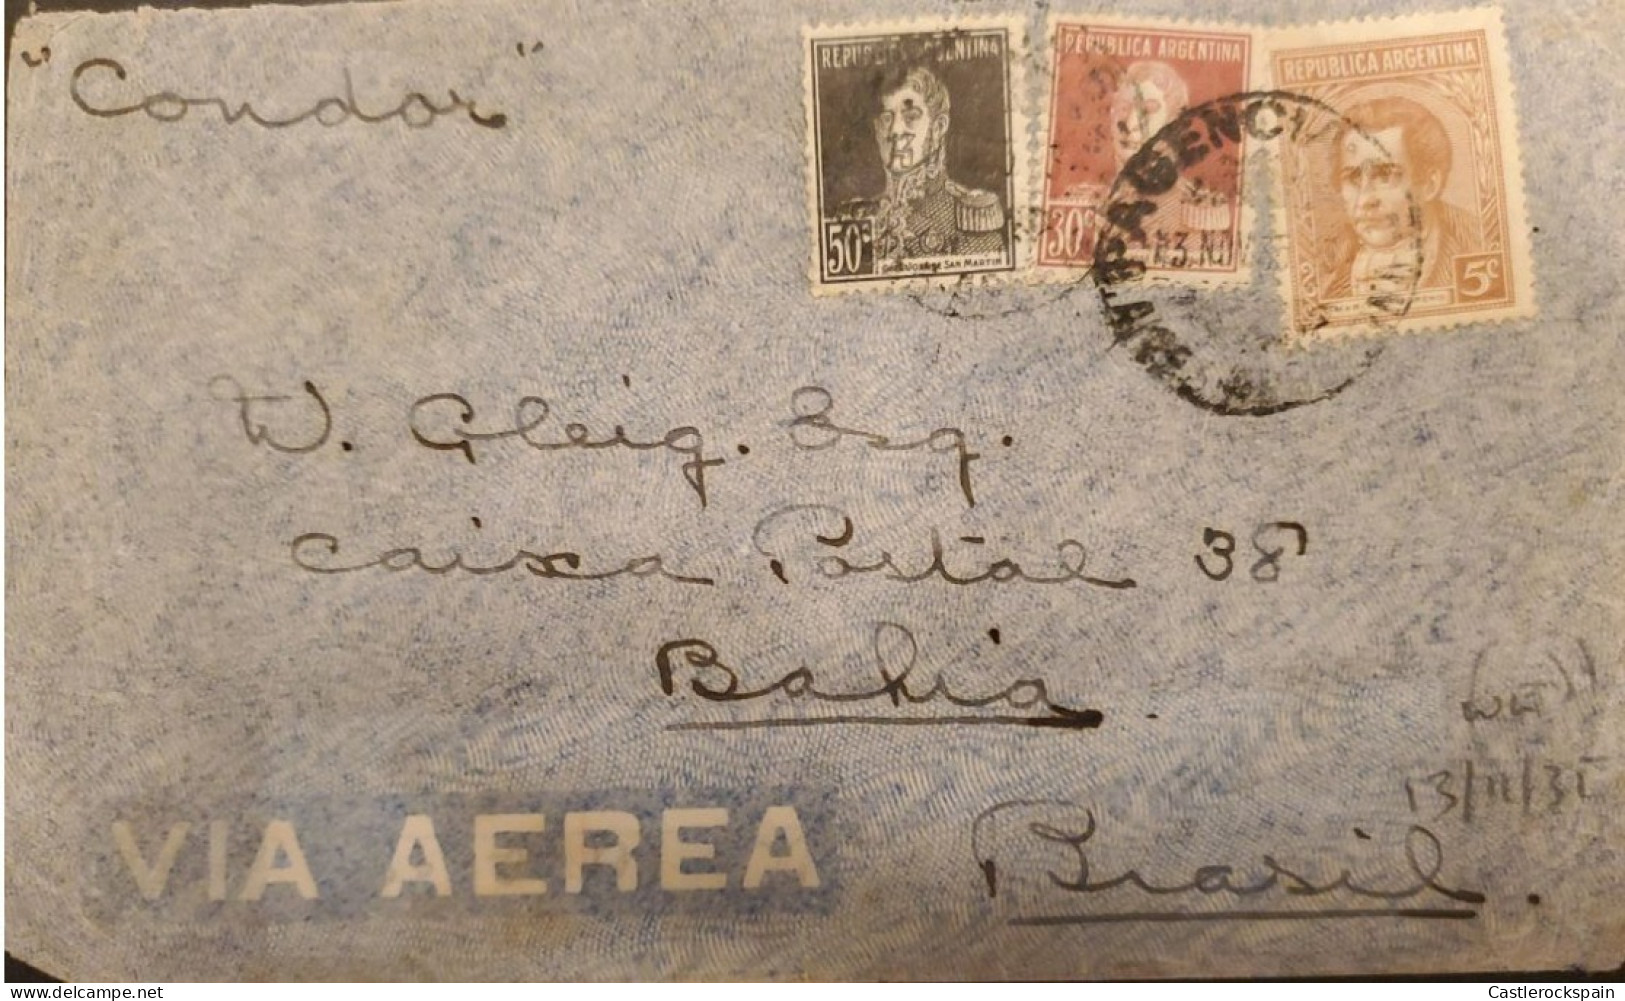 MI) 1935, ARGENTINA, VIA CONDOR, FROM BUENOS AIRES TO BAHIA - BRAZIL, AIR MAIL, GRA SAN MARTIN, XF - Used Stamps